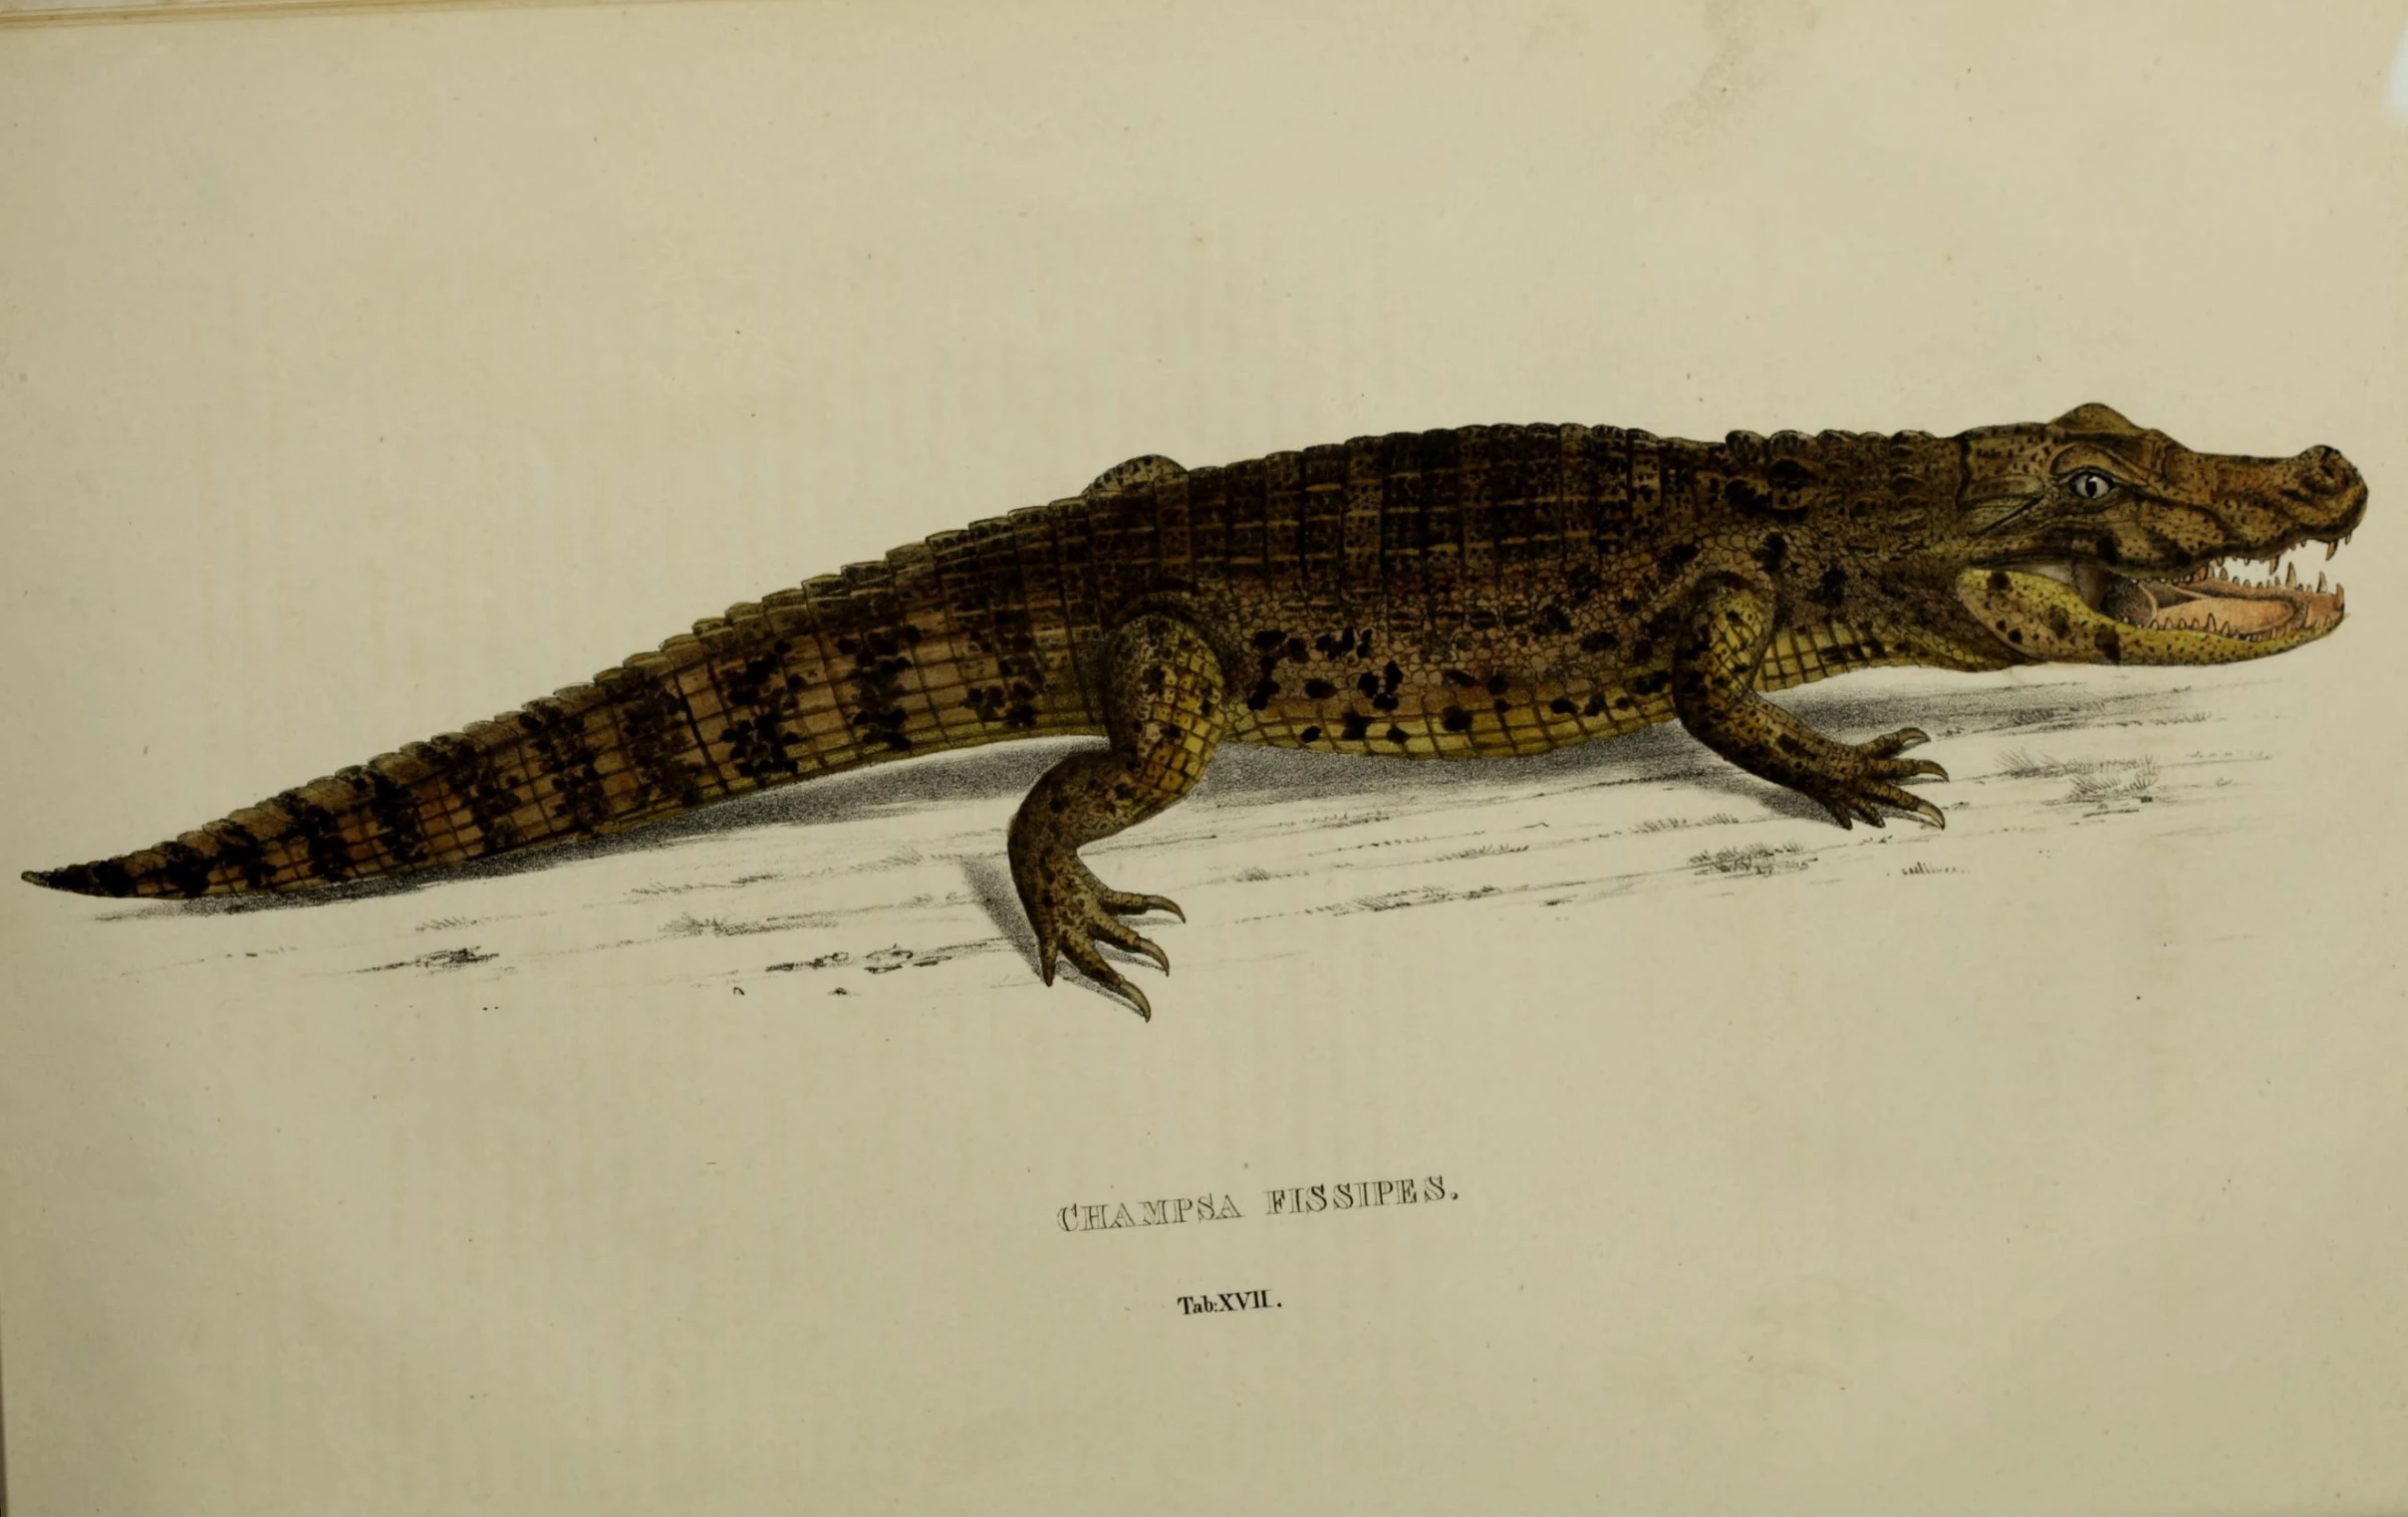 an illustration showing an alligator from the early 1800s